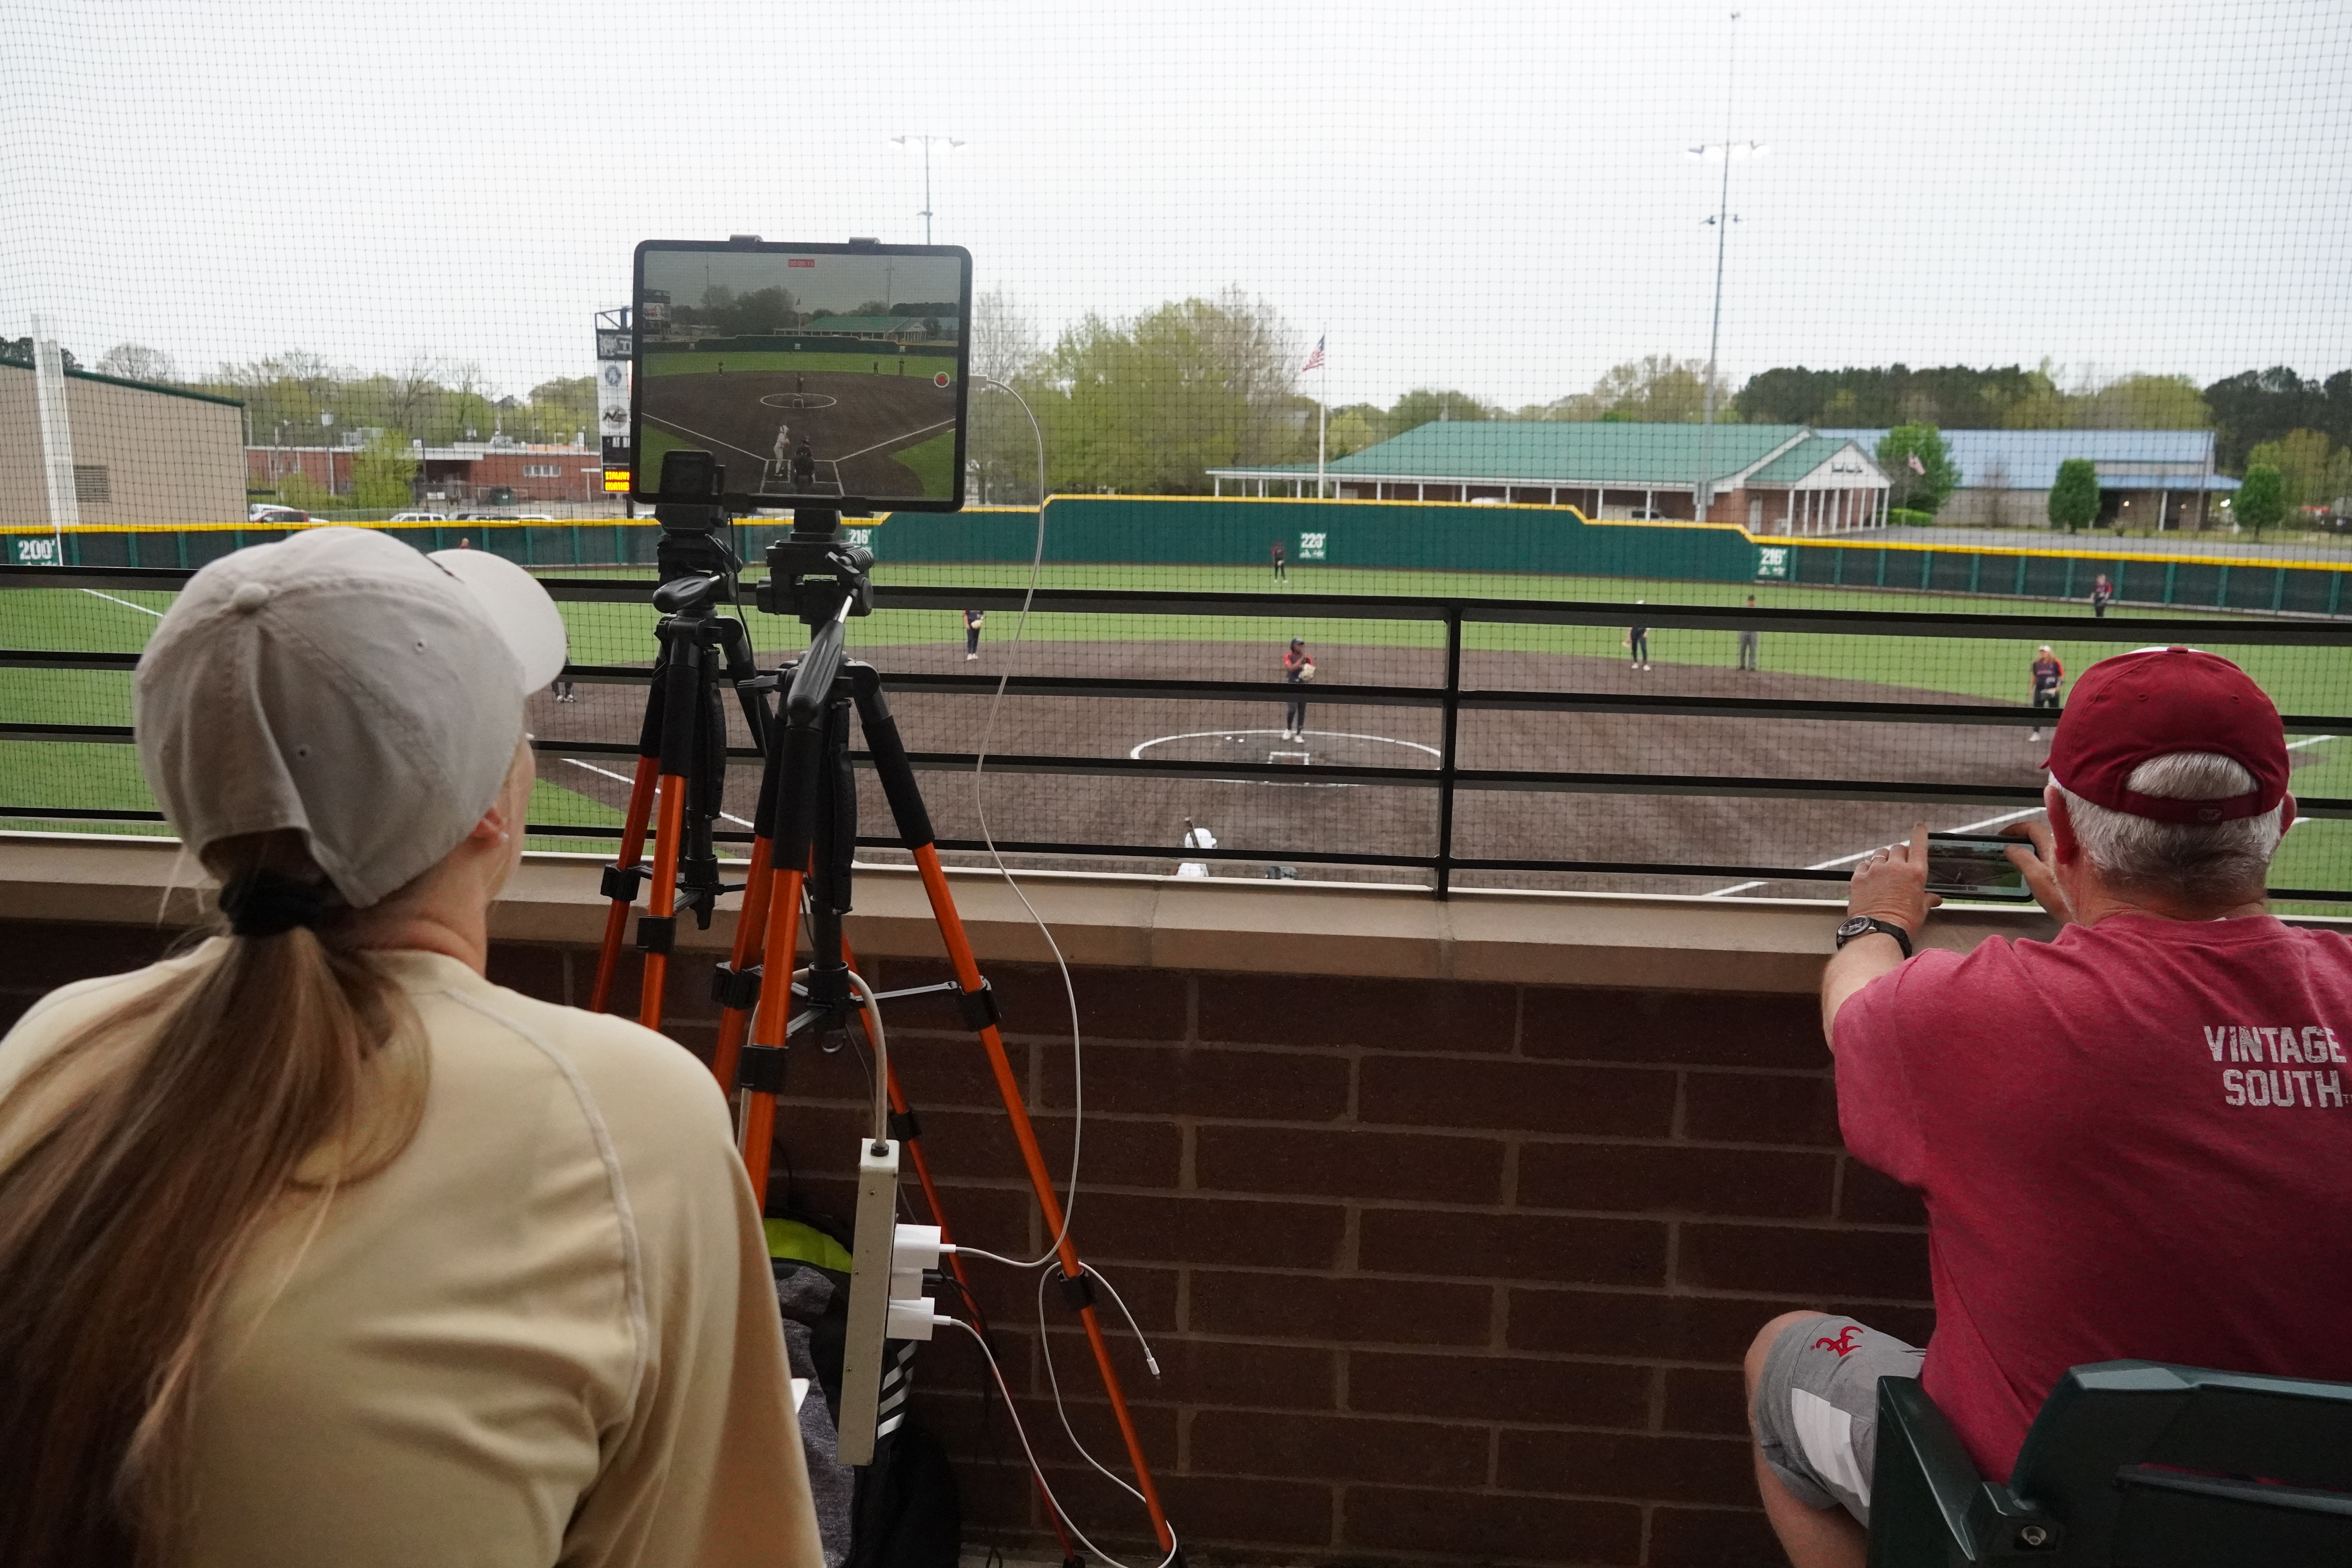 student taking a video of the softball game